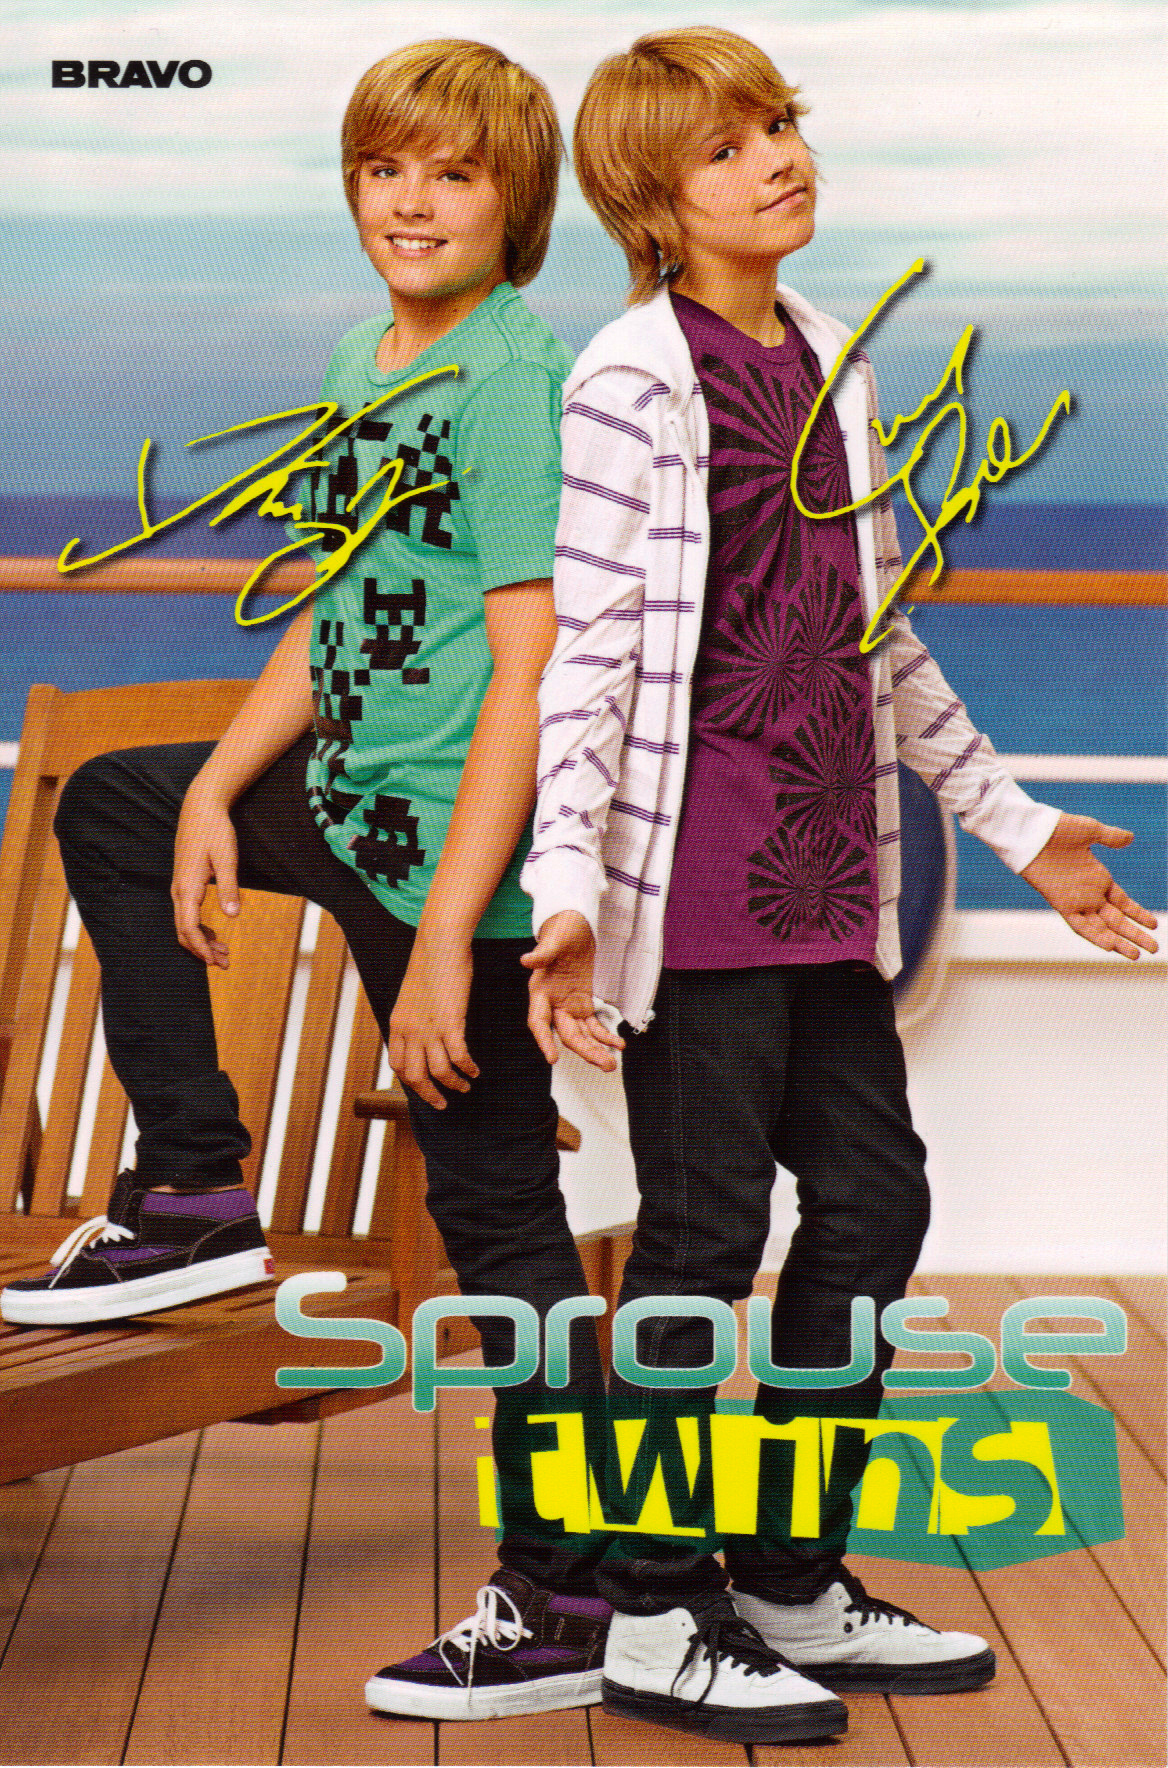 http://images2.fanpop.com/image/photos/9700000/Sprouse-Twins-a-photocard-with-autographs-of-the-german-magazine-Bravo-the-sprouse-brothers-9733831-1168-1768.jpg